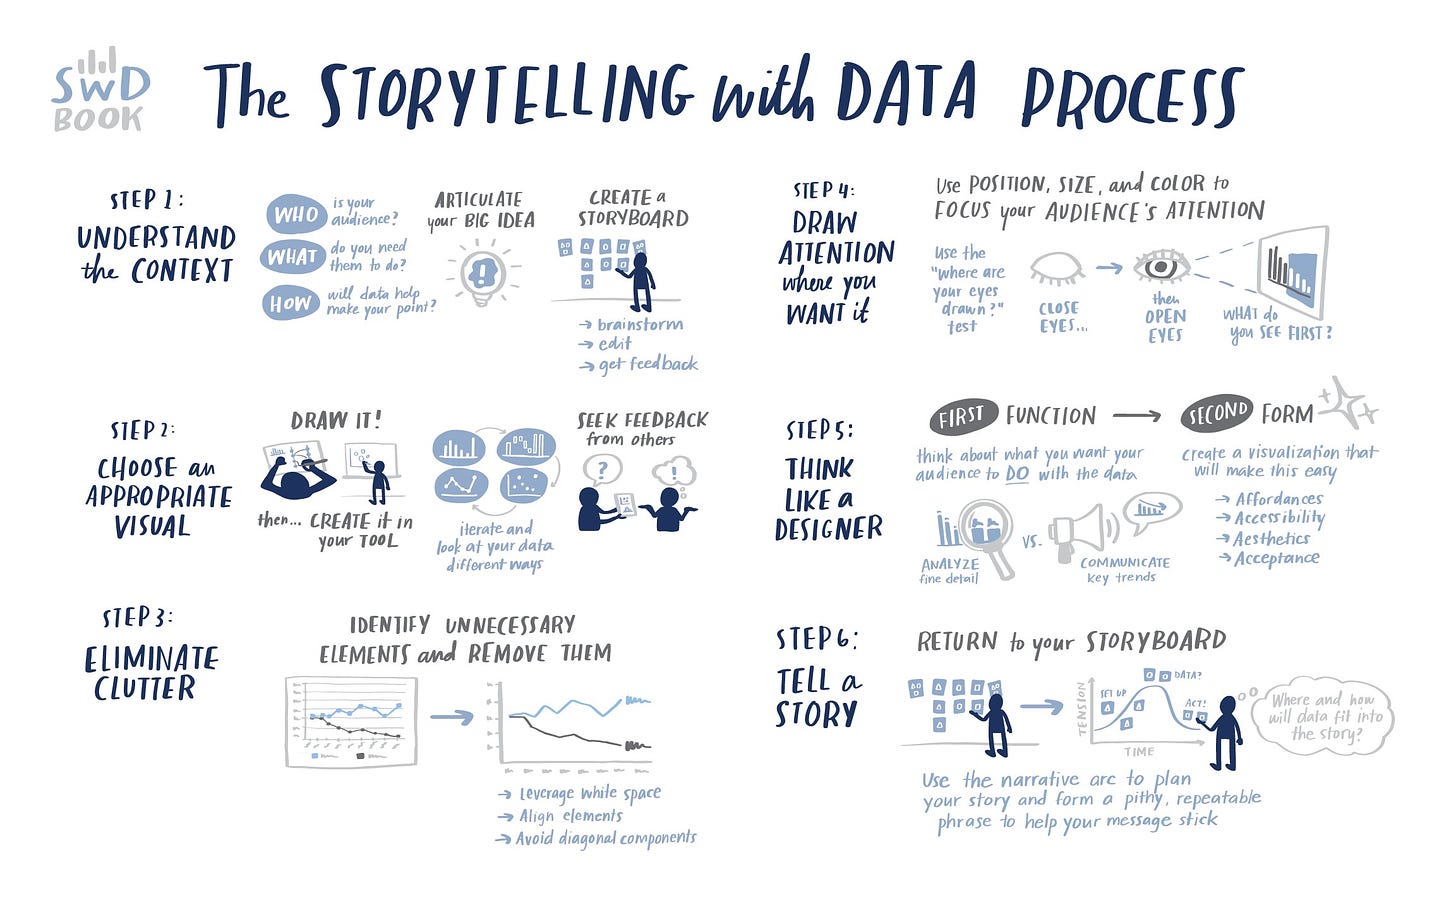 Cole Knafflic's "The storytelling with data process". The steps are: 1. understand the context; 2. choose an appropriate visual; 3. eliminate clutter; 4. draw attention where you want it; 5. think like a designer; 6. tell a story. See her excellent book for all the details.